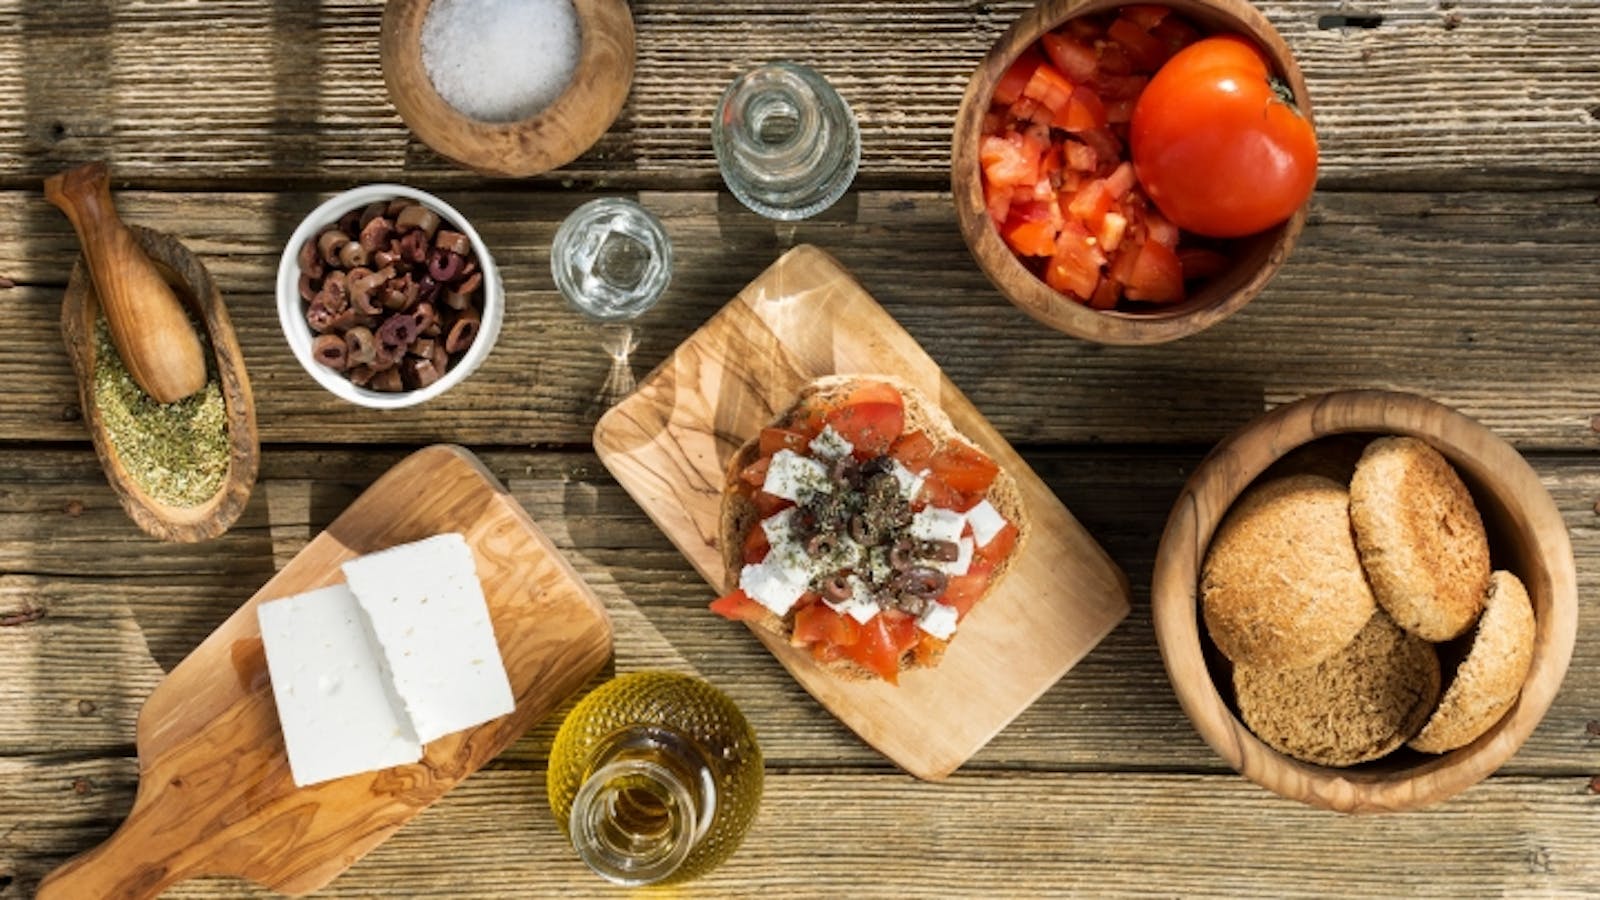 But what are the most classic Greek foods?